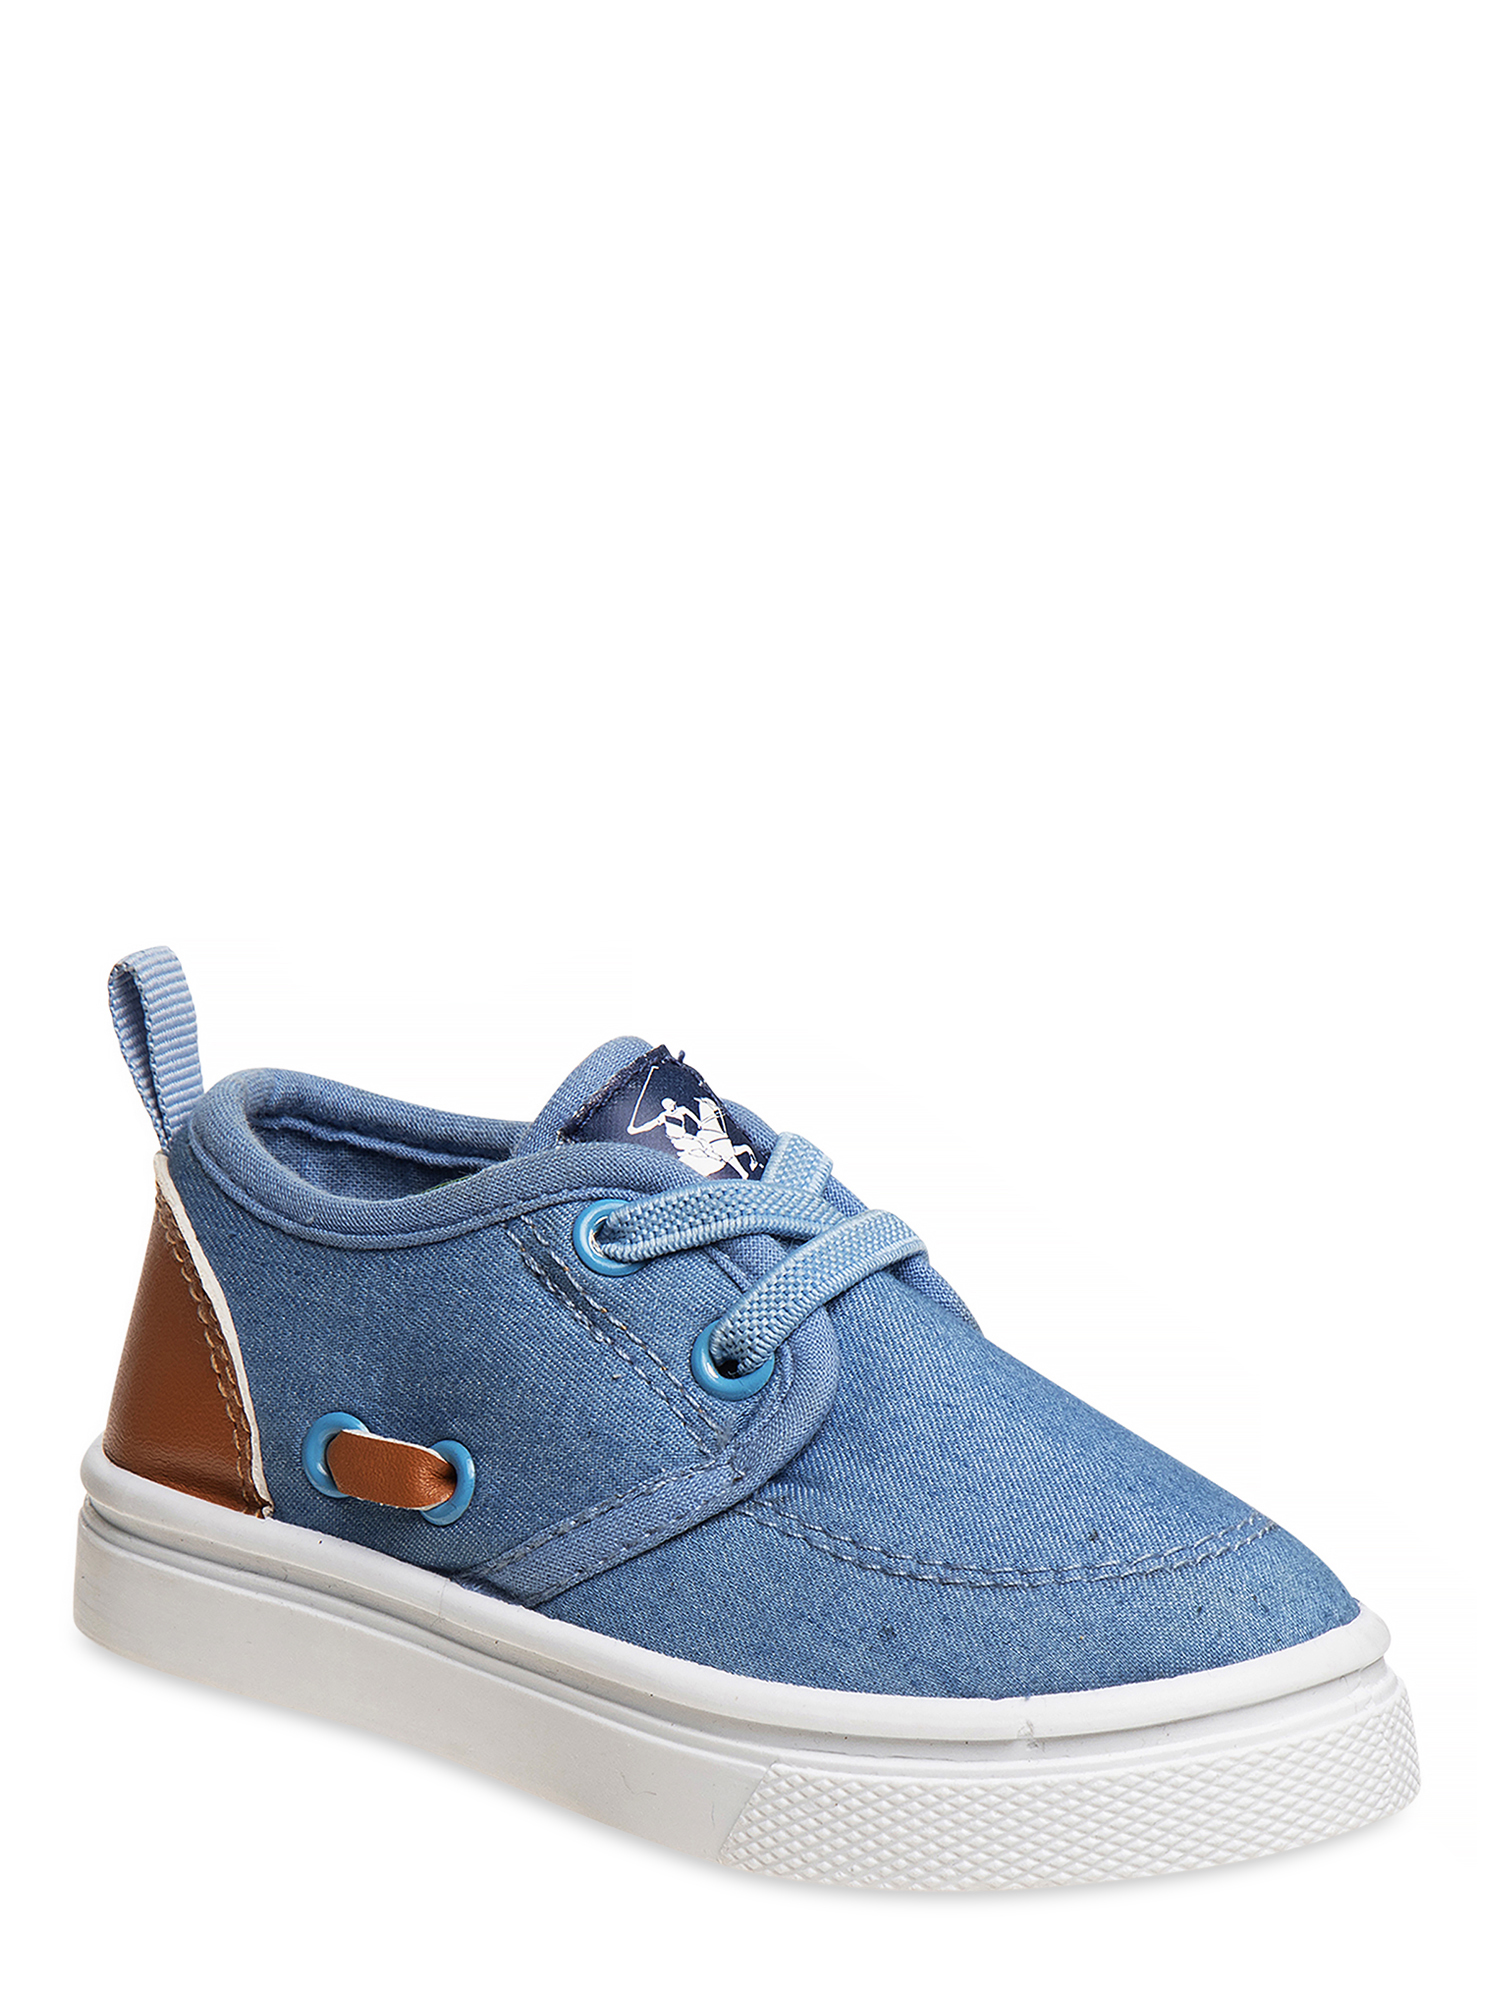 Beverly Hills Polo Club Toddler Boys Denim Colorblock Casual Sneakers - image 1 of 5